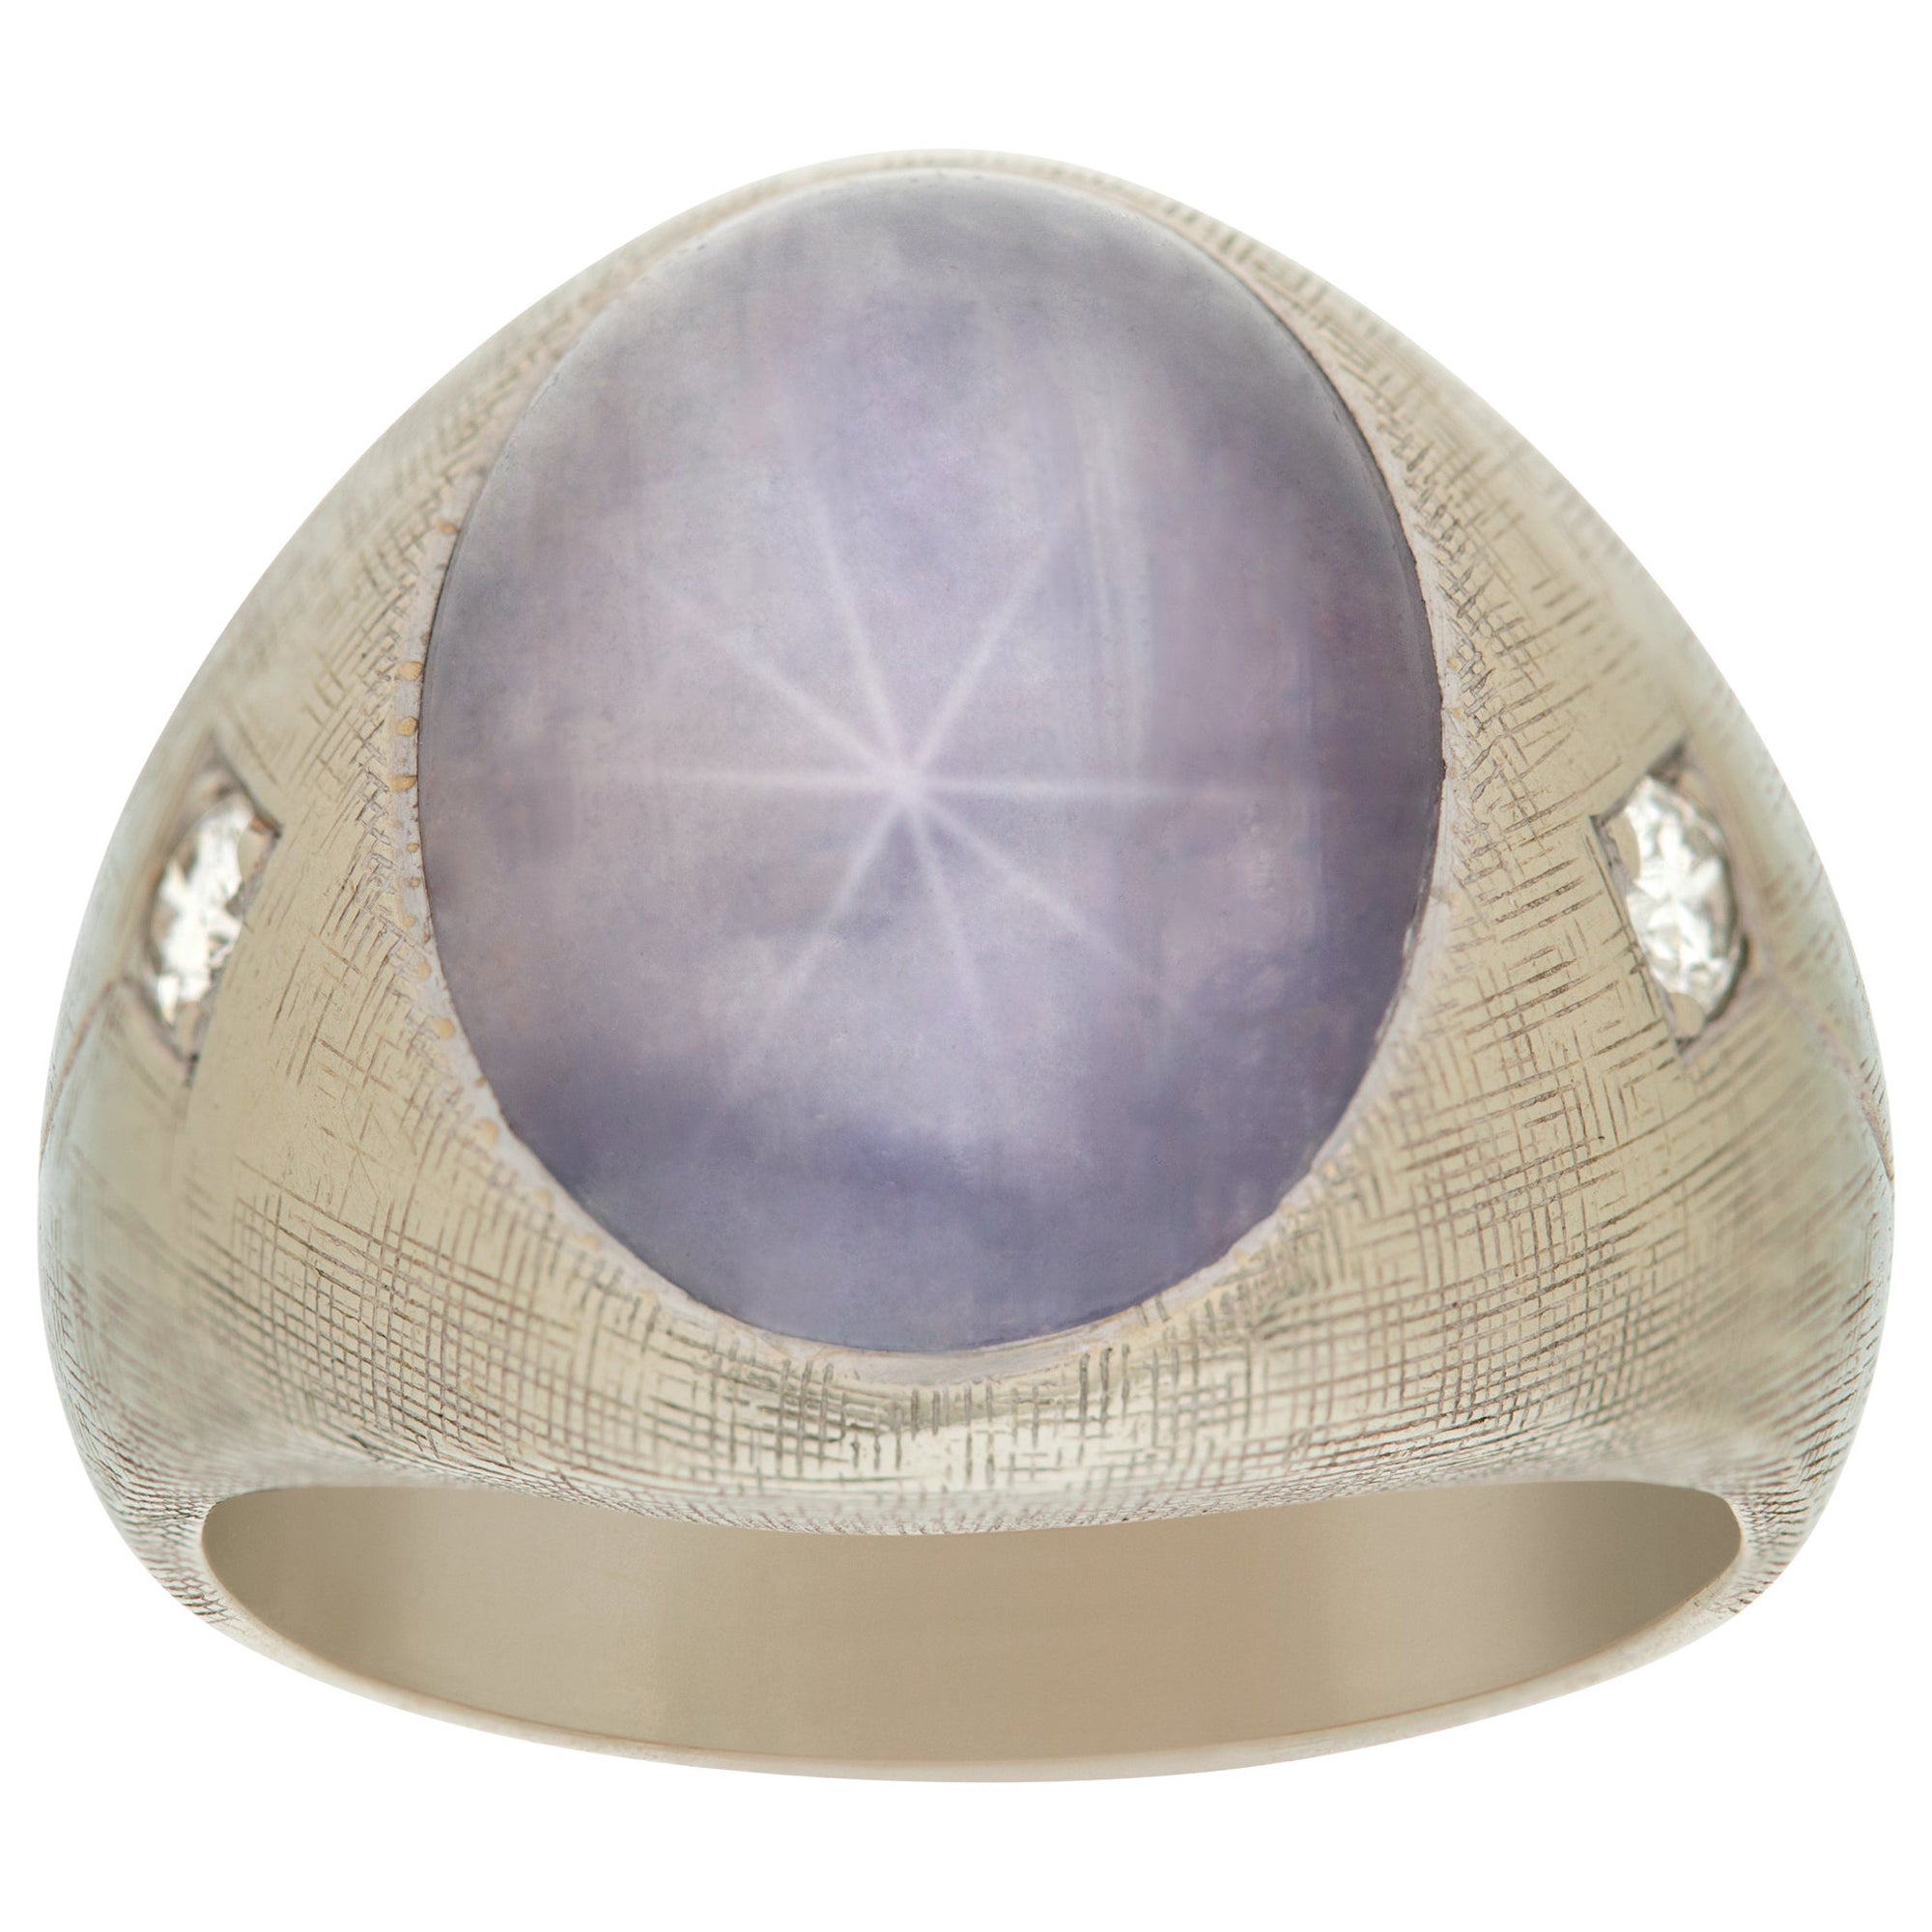 Star sapphire 14k white gold ring with 2 diamond accents.